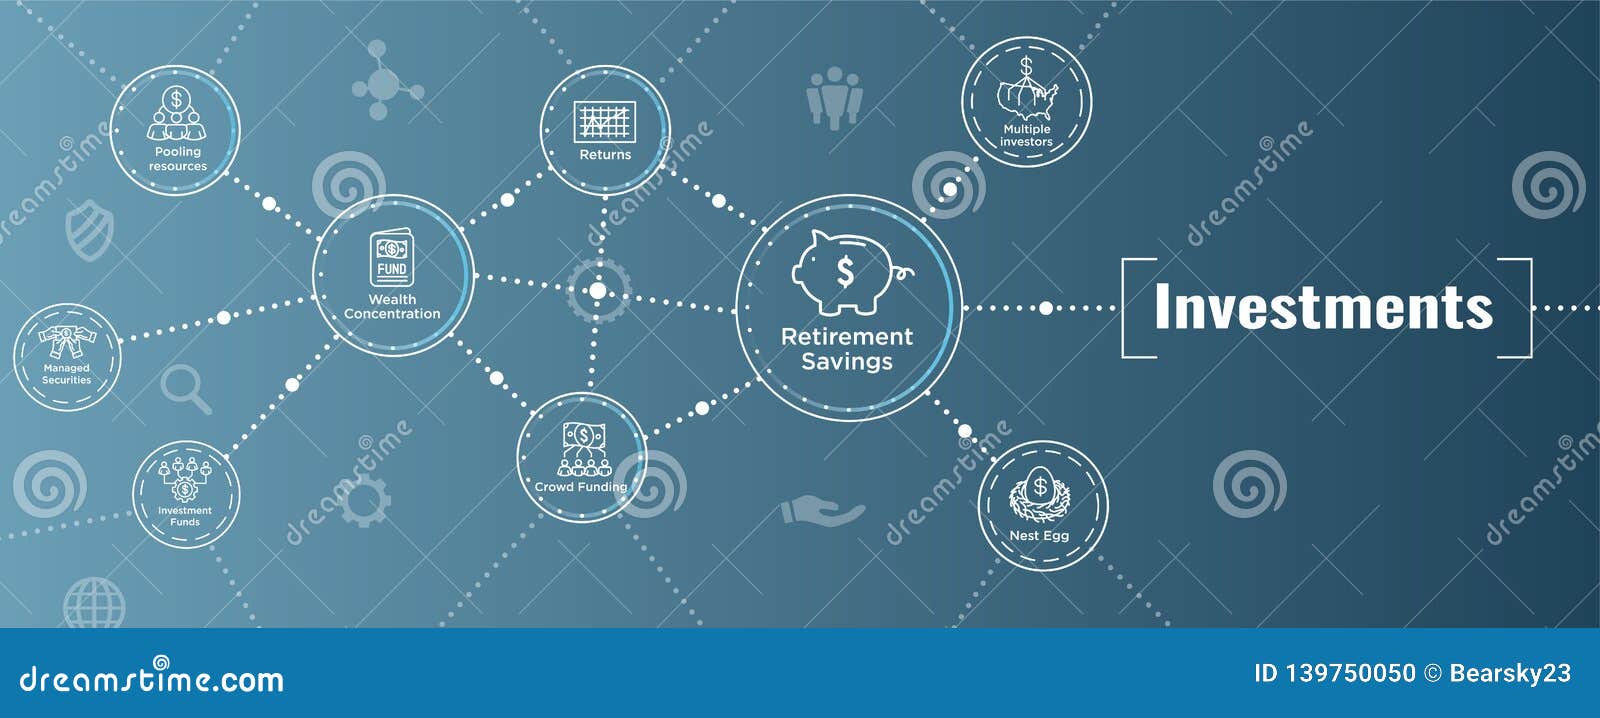 retirement investments, dividend income, mutual fund, ira icon set web header banner